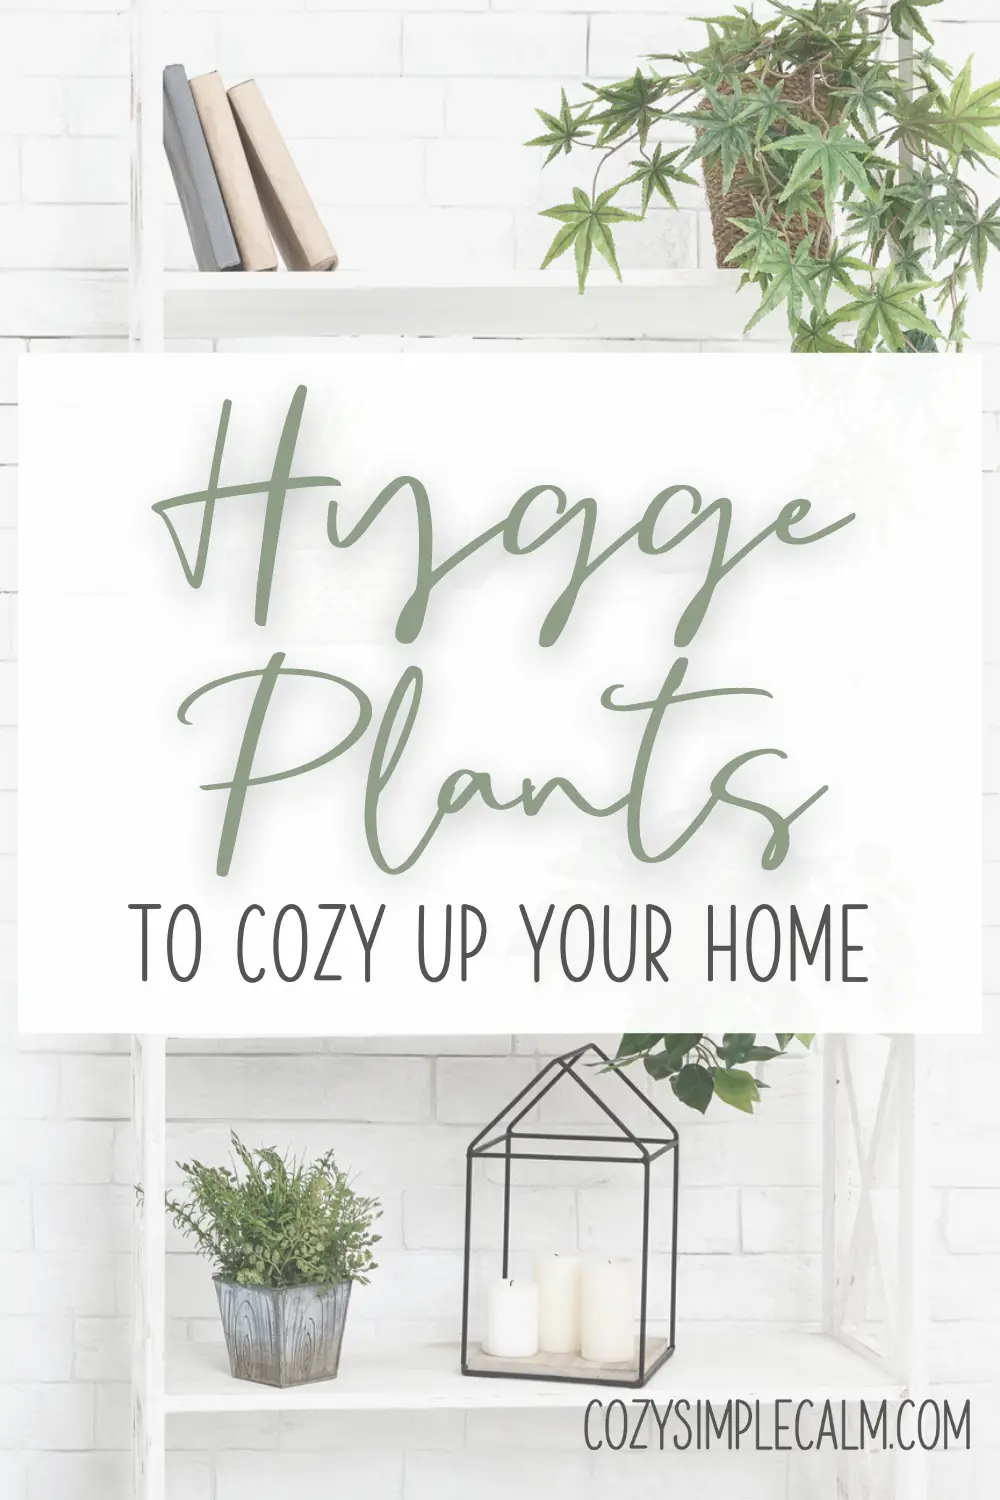 Image of houseplants and candles on white shelf - Text overlay: Hygge Plants To cozy up your home - cozysimplecalm.com